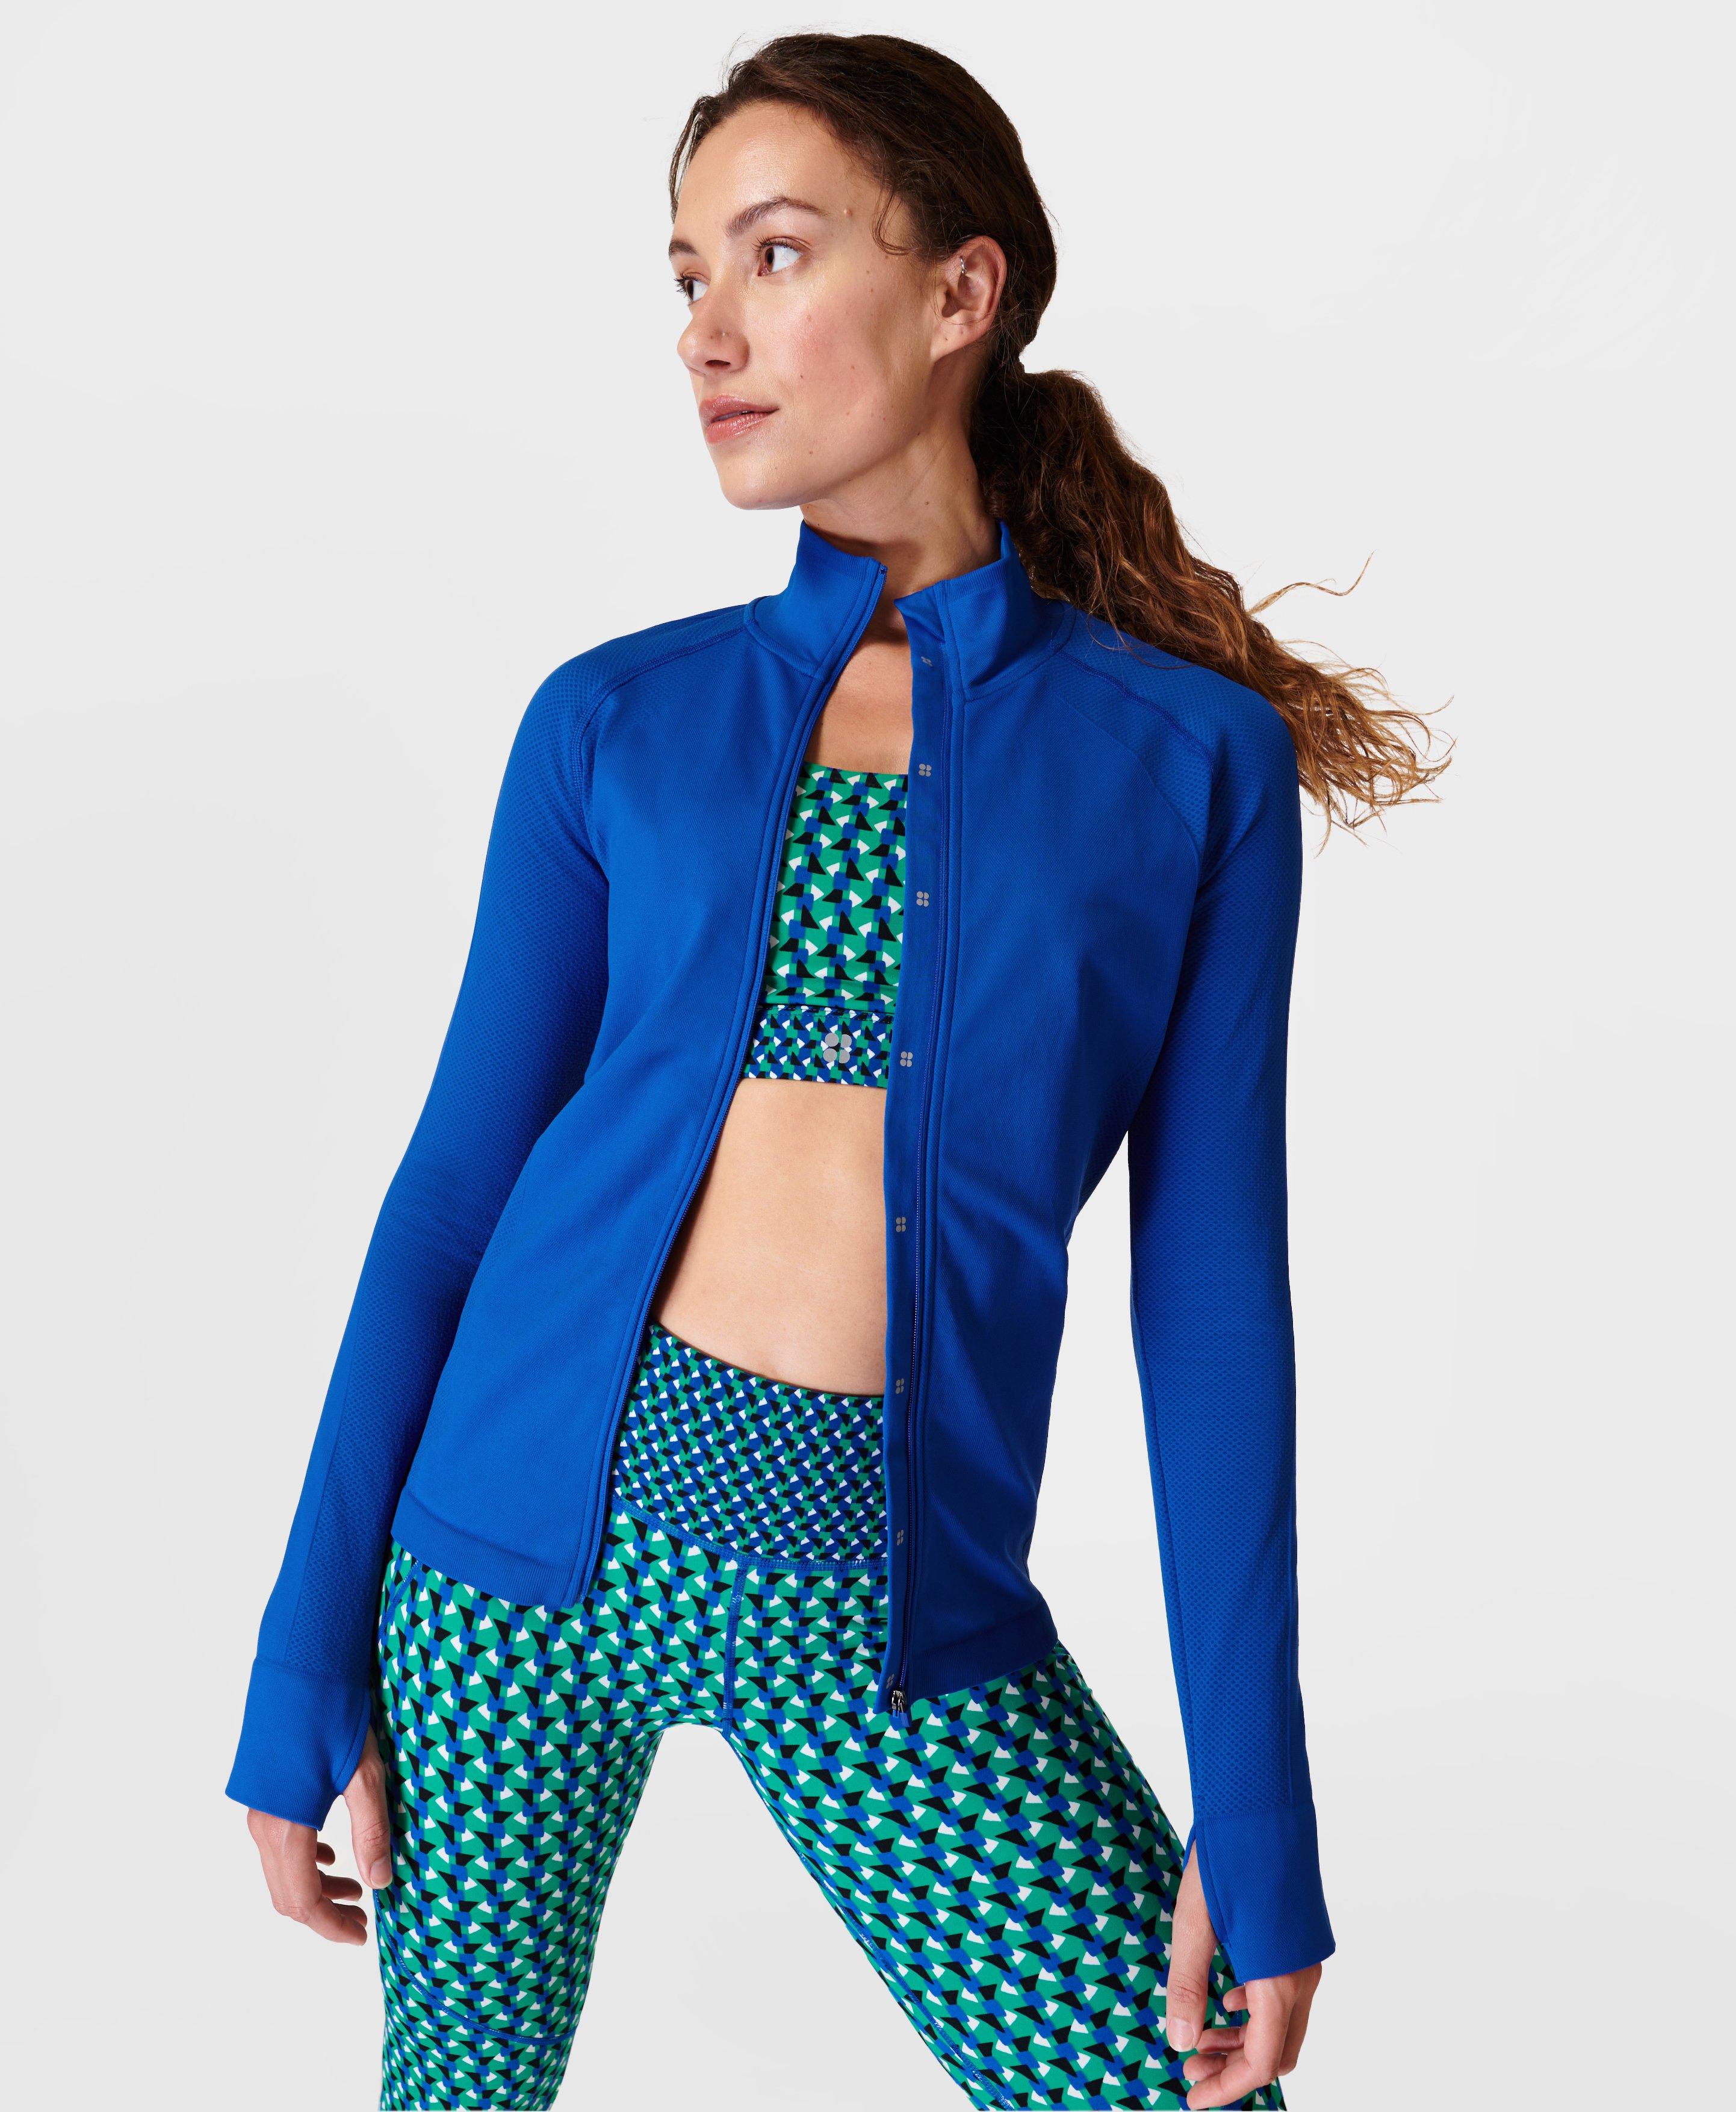 Blue Athlete zip-up jersey thermal top, Sweaty Betty